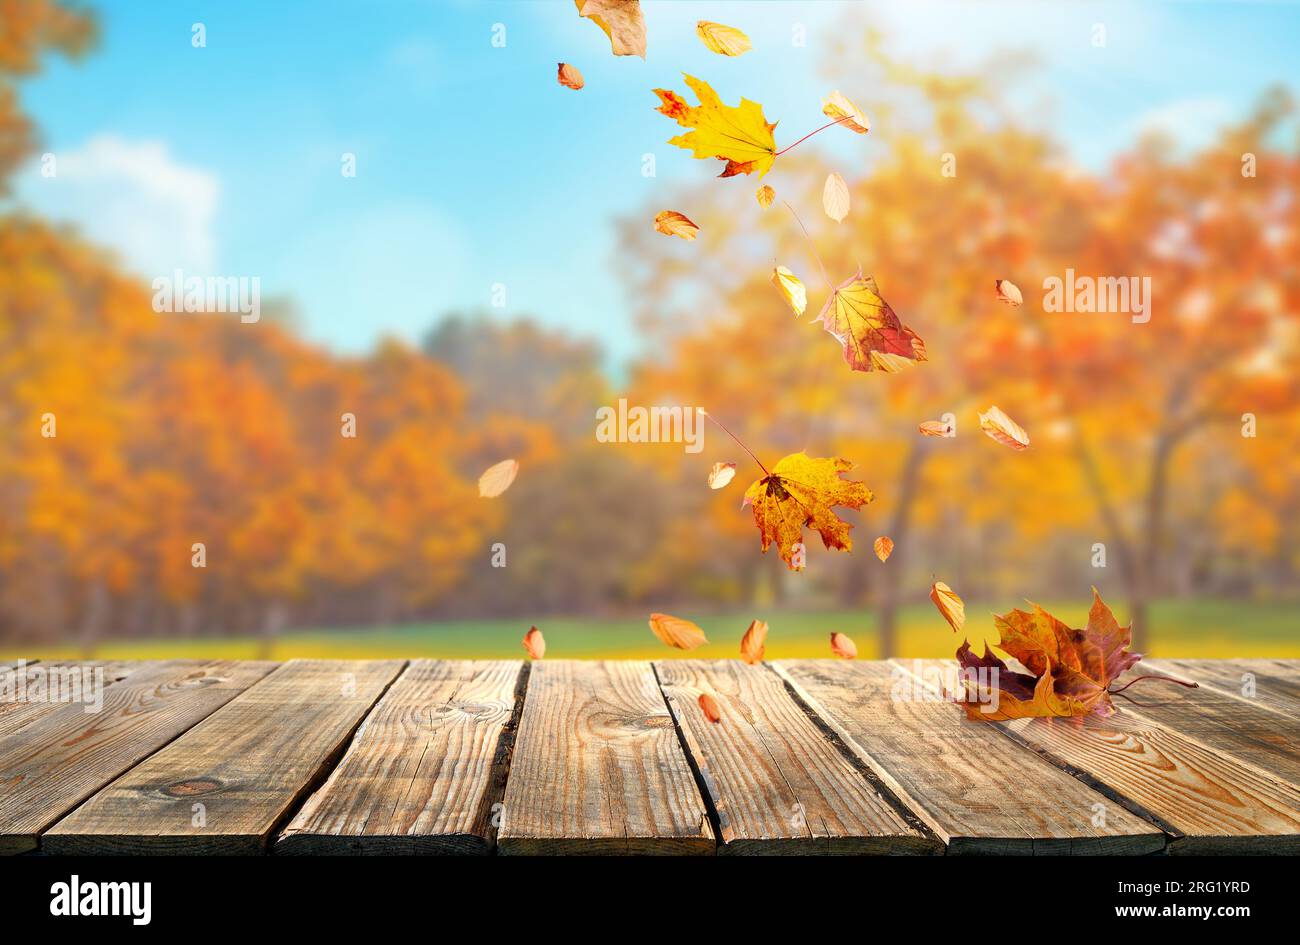 orange fall  leaves and old wooden board, autumn natural background Stock Photo